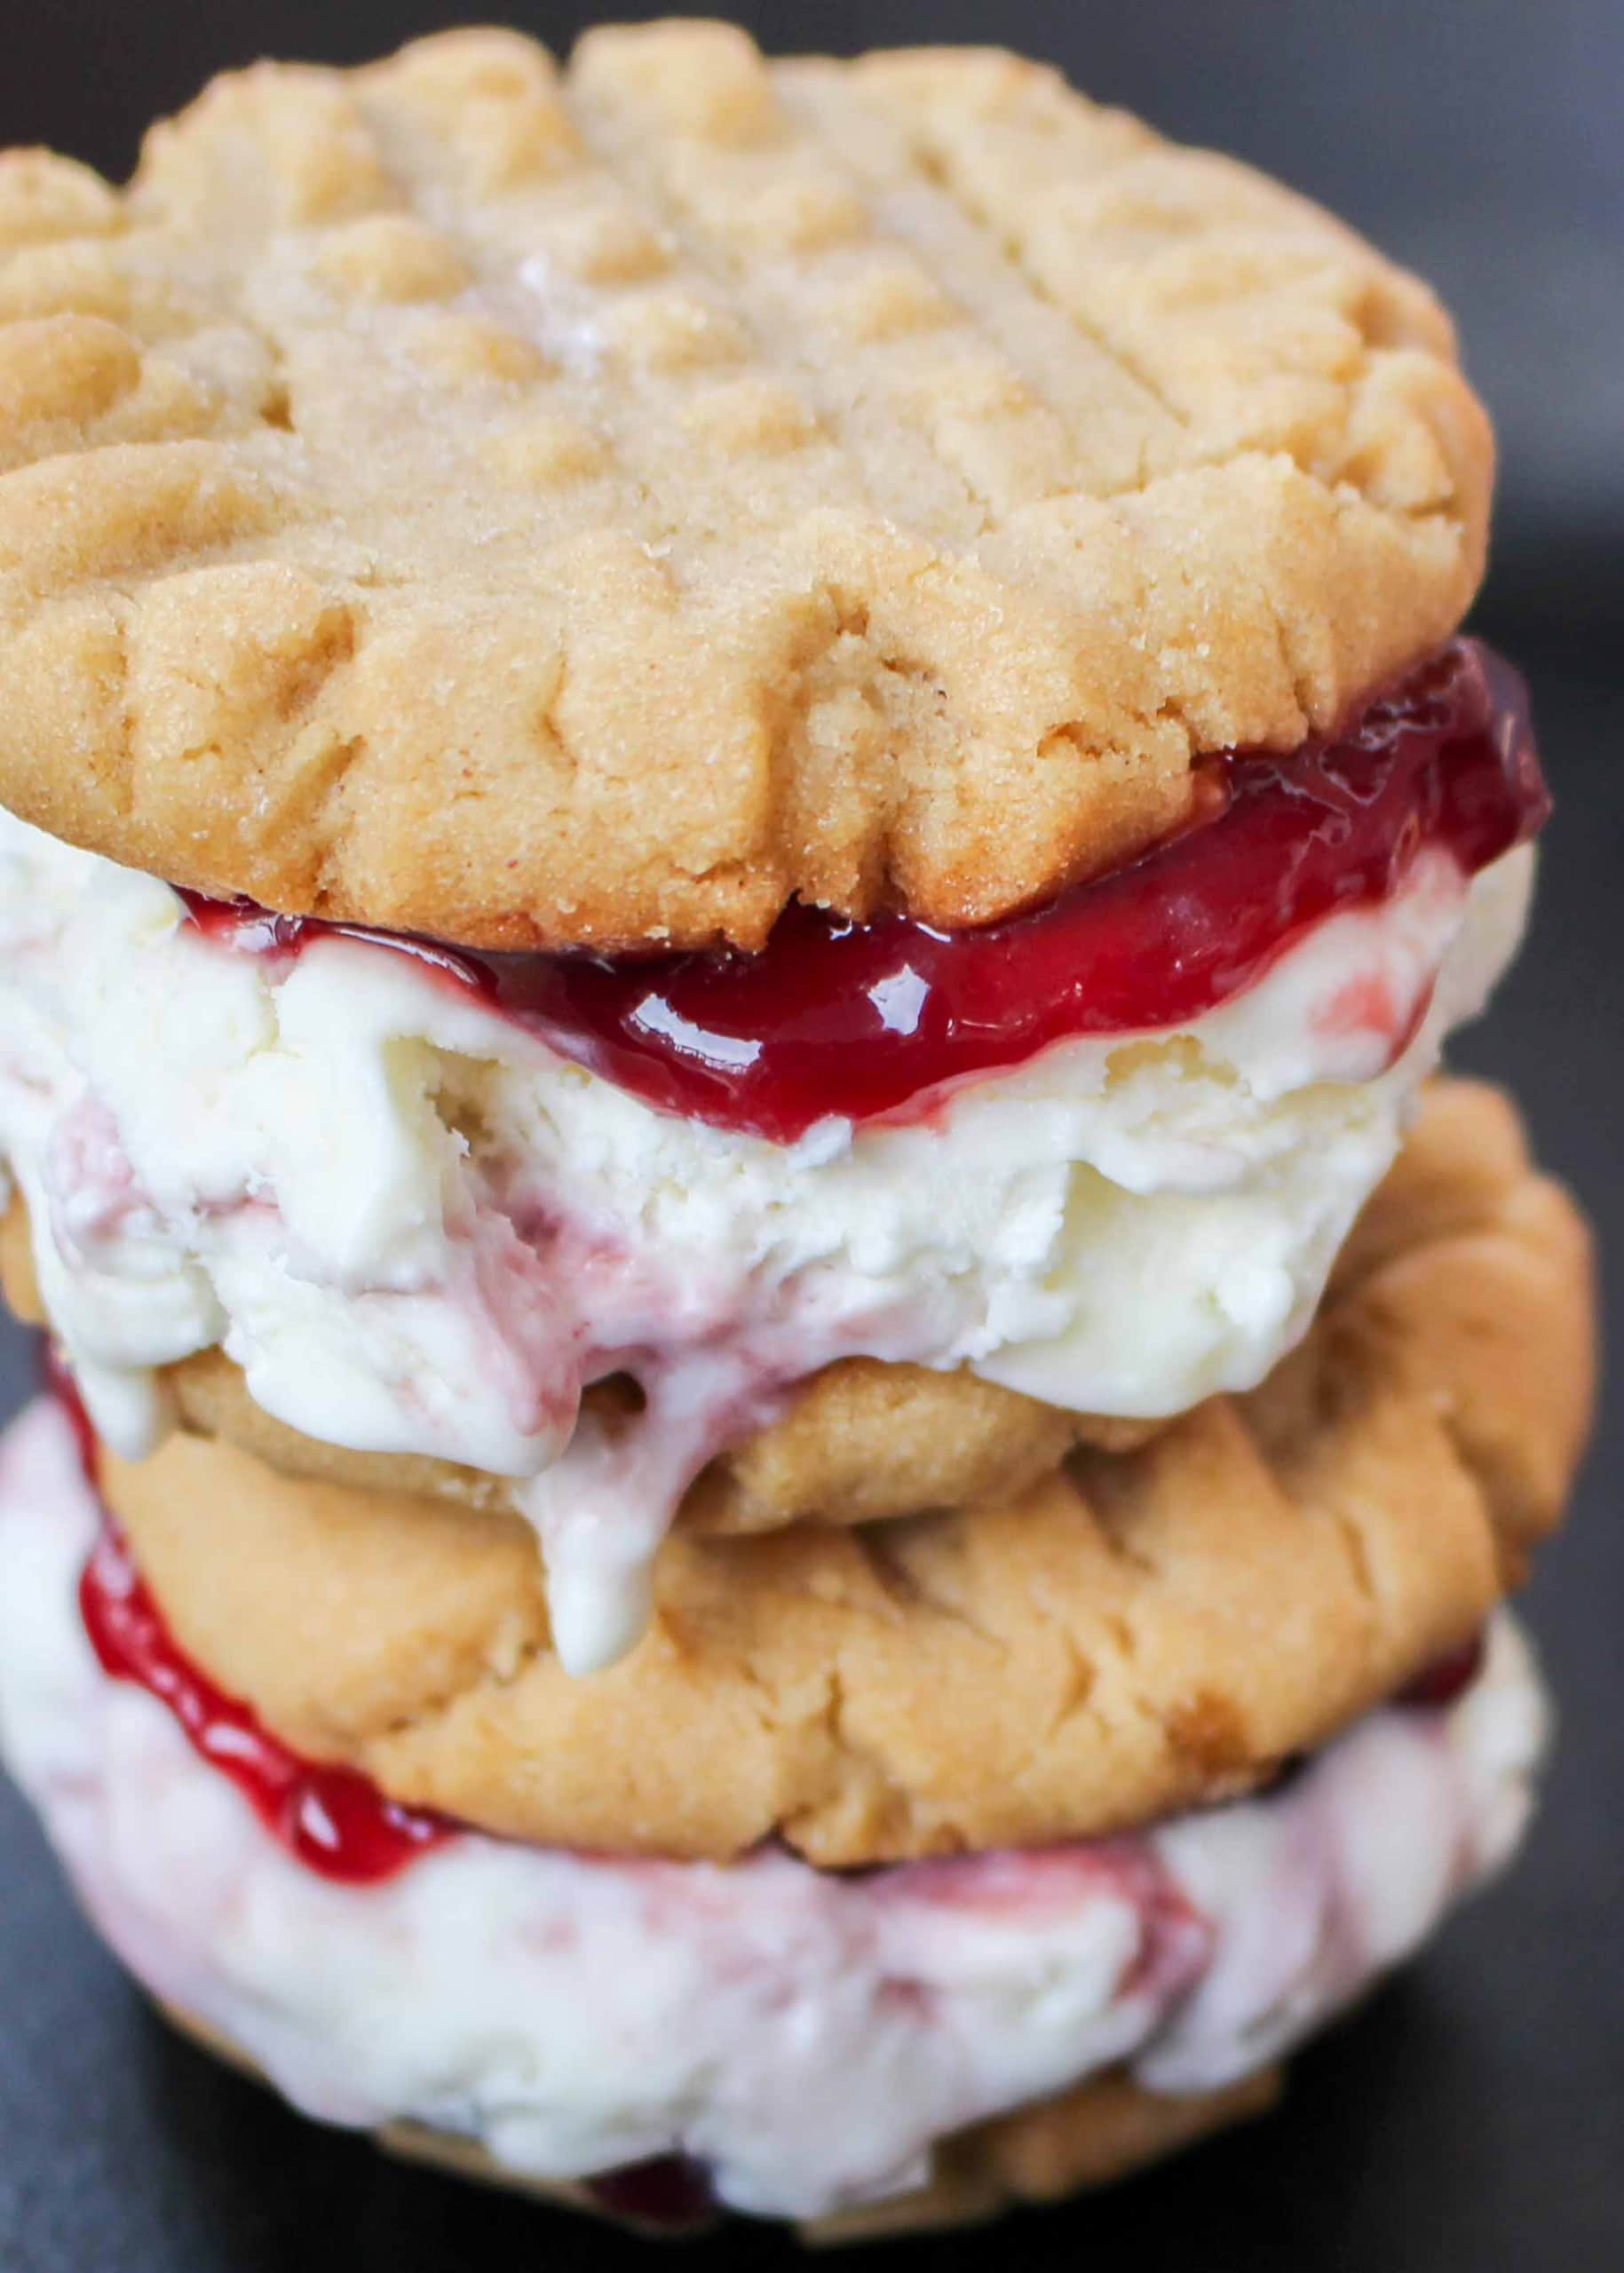 https://chocolatewithgrace.com/wp-content/uploads/2022/05/Peanut-Butter-and-Jelly-Ice-Cream-Sandwiches-edit-6-1-of-1-scaled.jpg